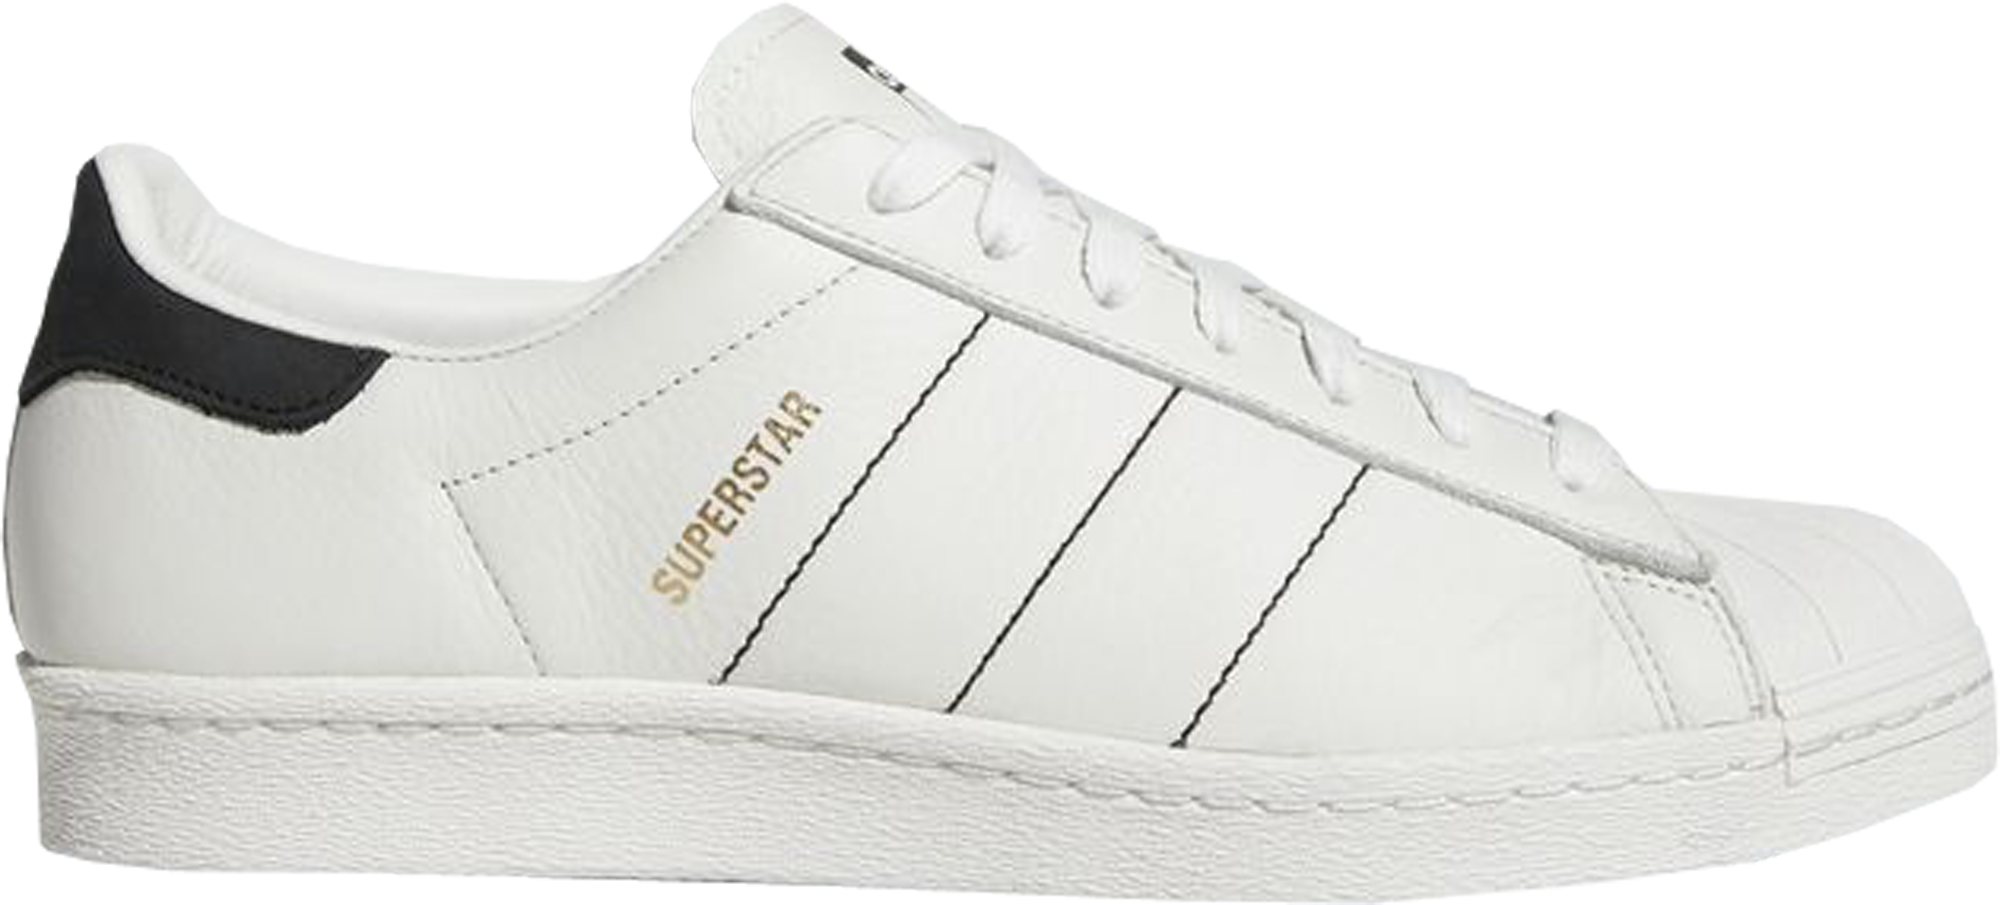 adidas Superstar Handcrafted Pack (Off 